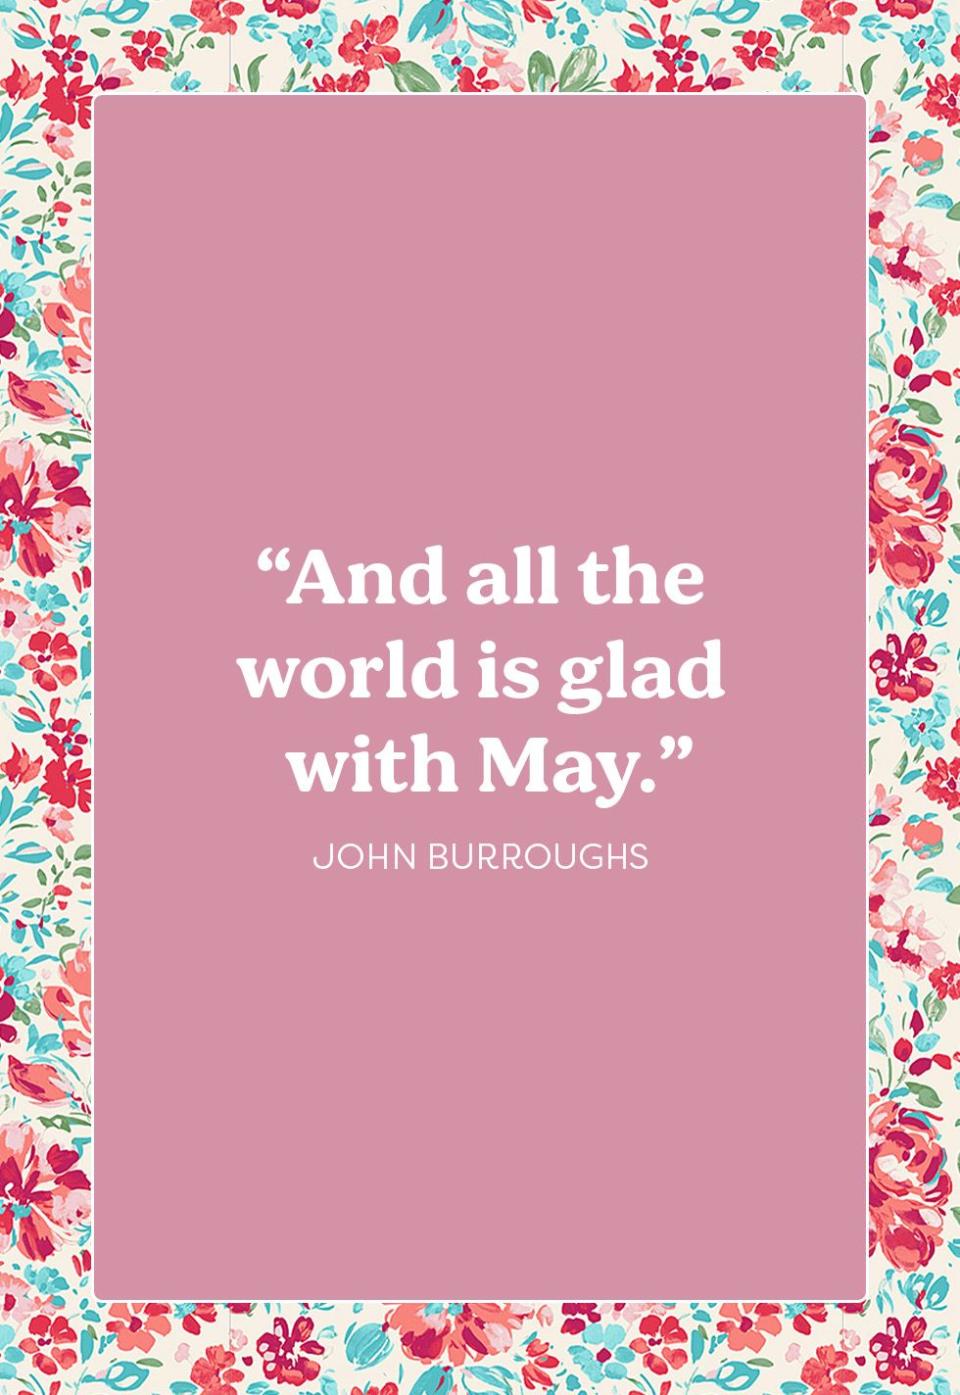 may quotes 4